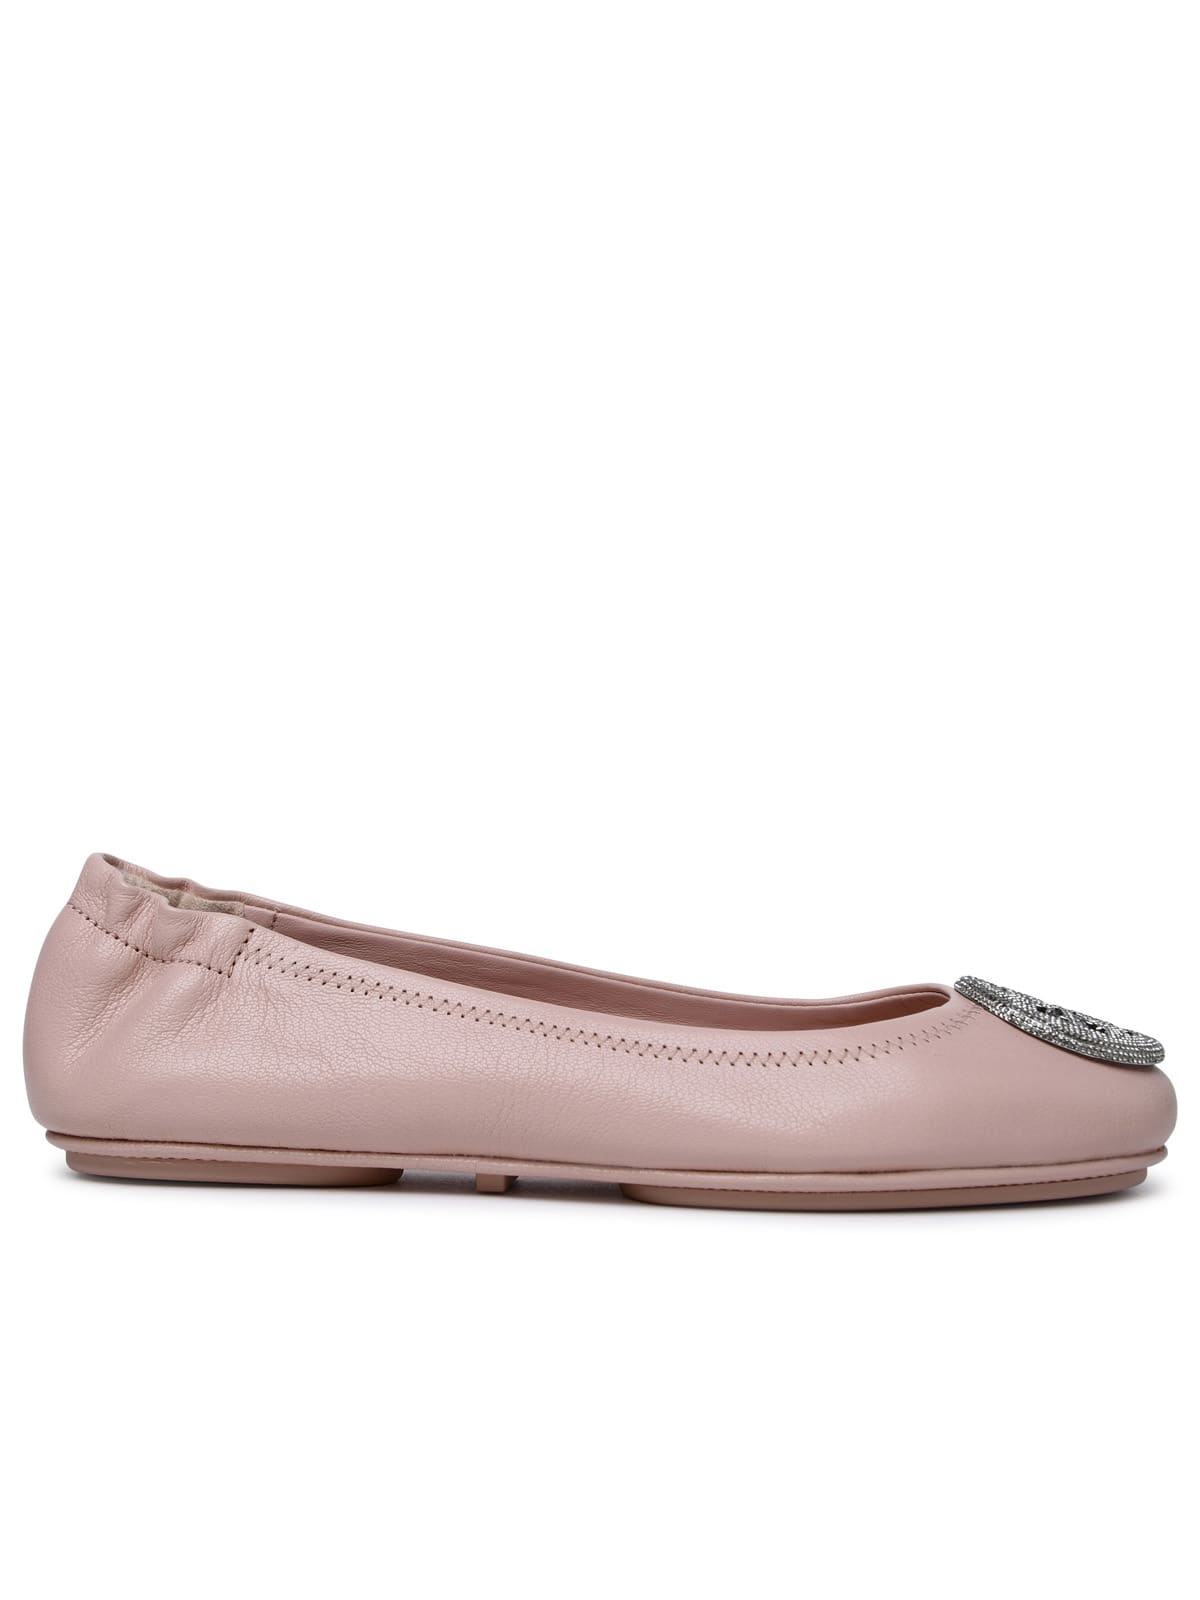 Shop Tory Burch Minnie Travel Pink Leather Ballet Flats